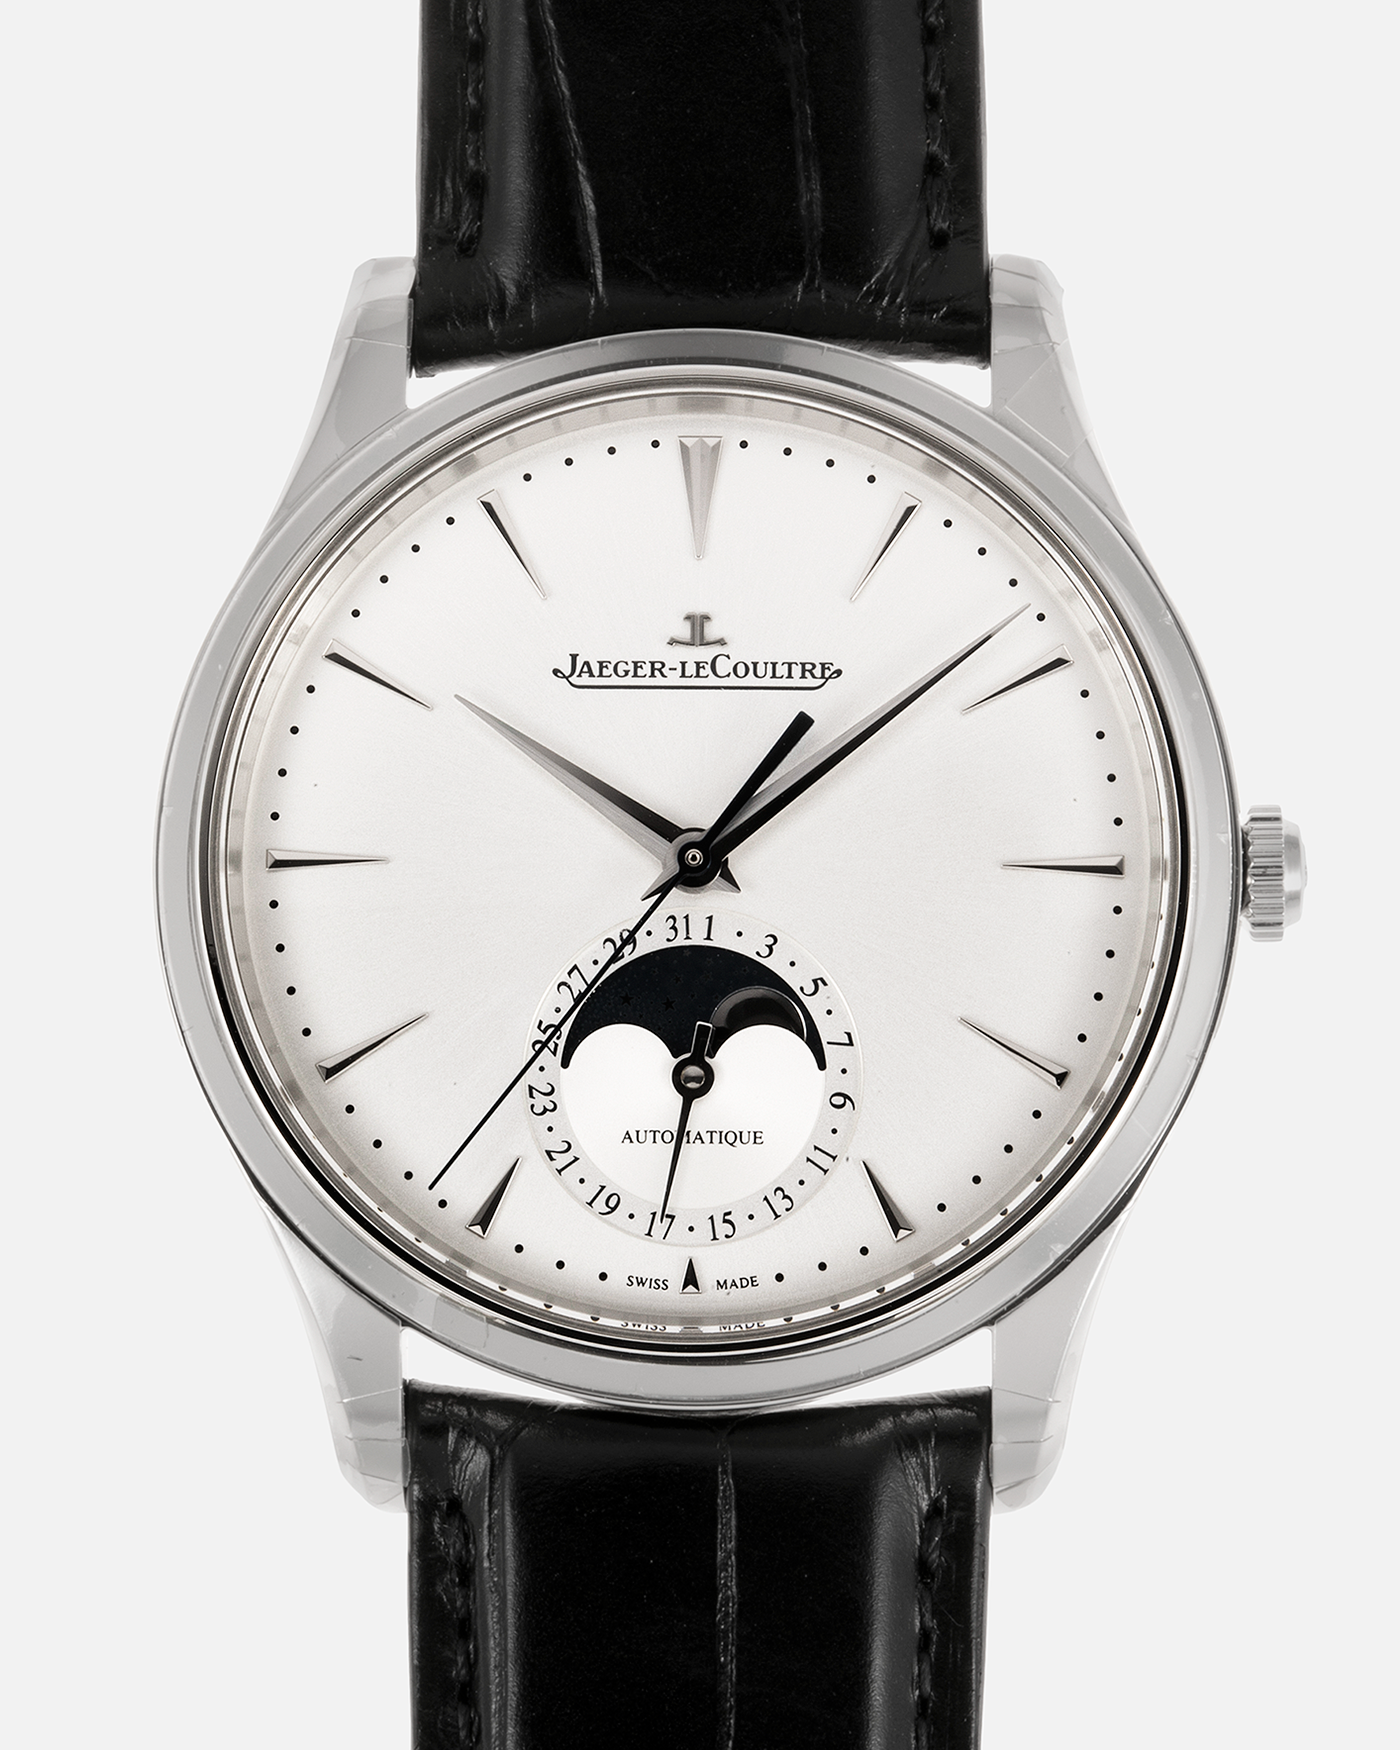 Brand: Jaeger LeCoultre Year: 2020 Model: Master Ultra Thin Moon Reference Number: Q1368430 Material: Stainless Steel Movement: JLC Cal. 925, Self-Winding Case Diameter: 39mm Bracelet / Strap: Jaeger LeCoultre Black Alligator Leather Strap with Signed Stainless Steel Deployant Clasp